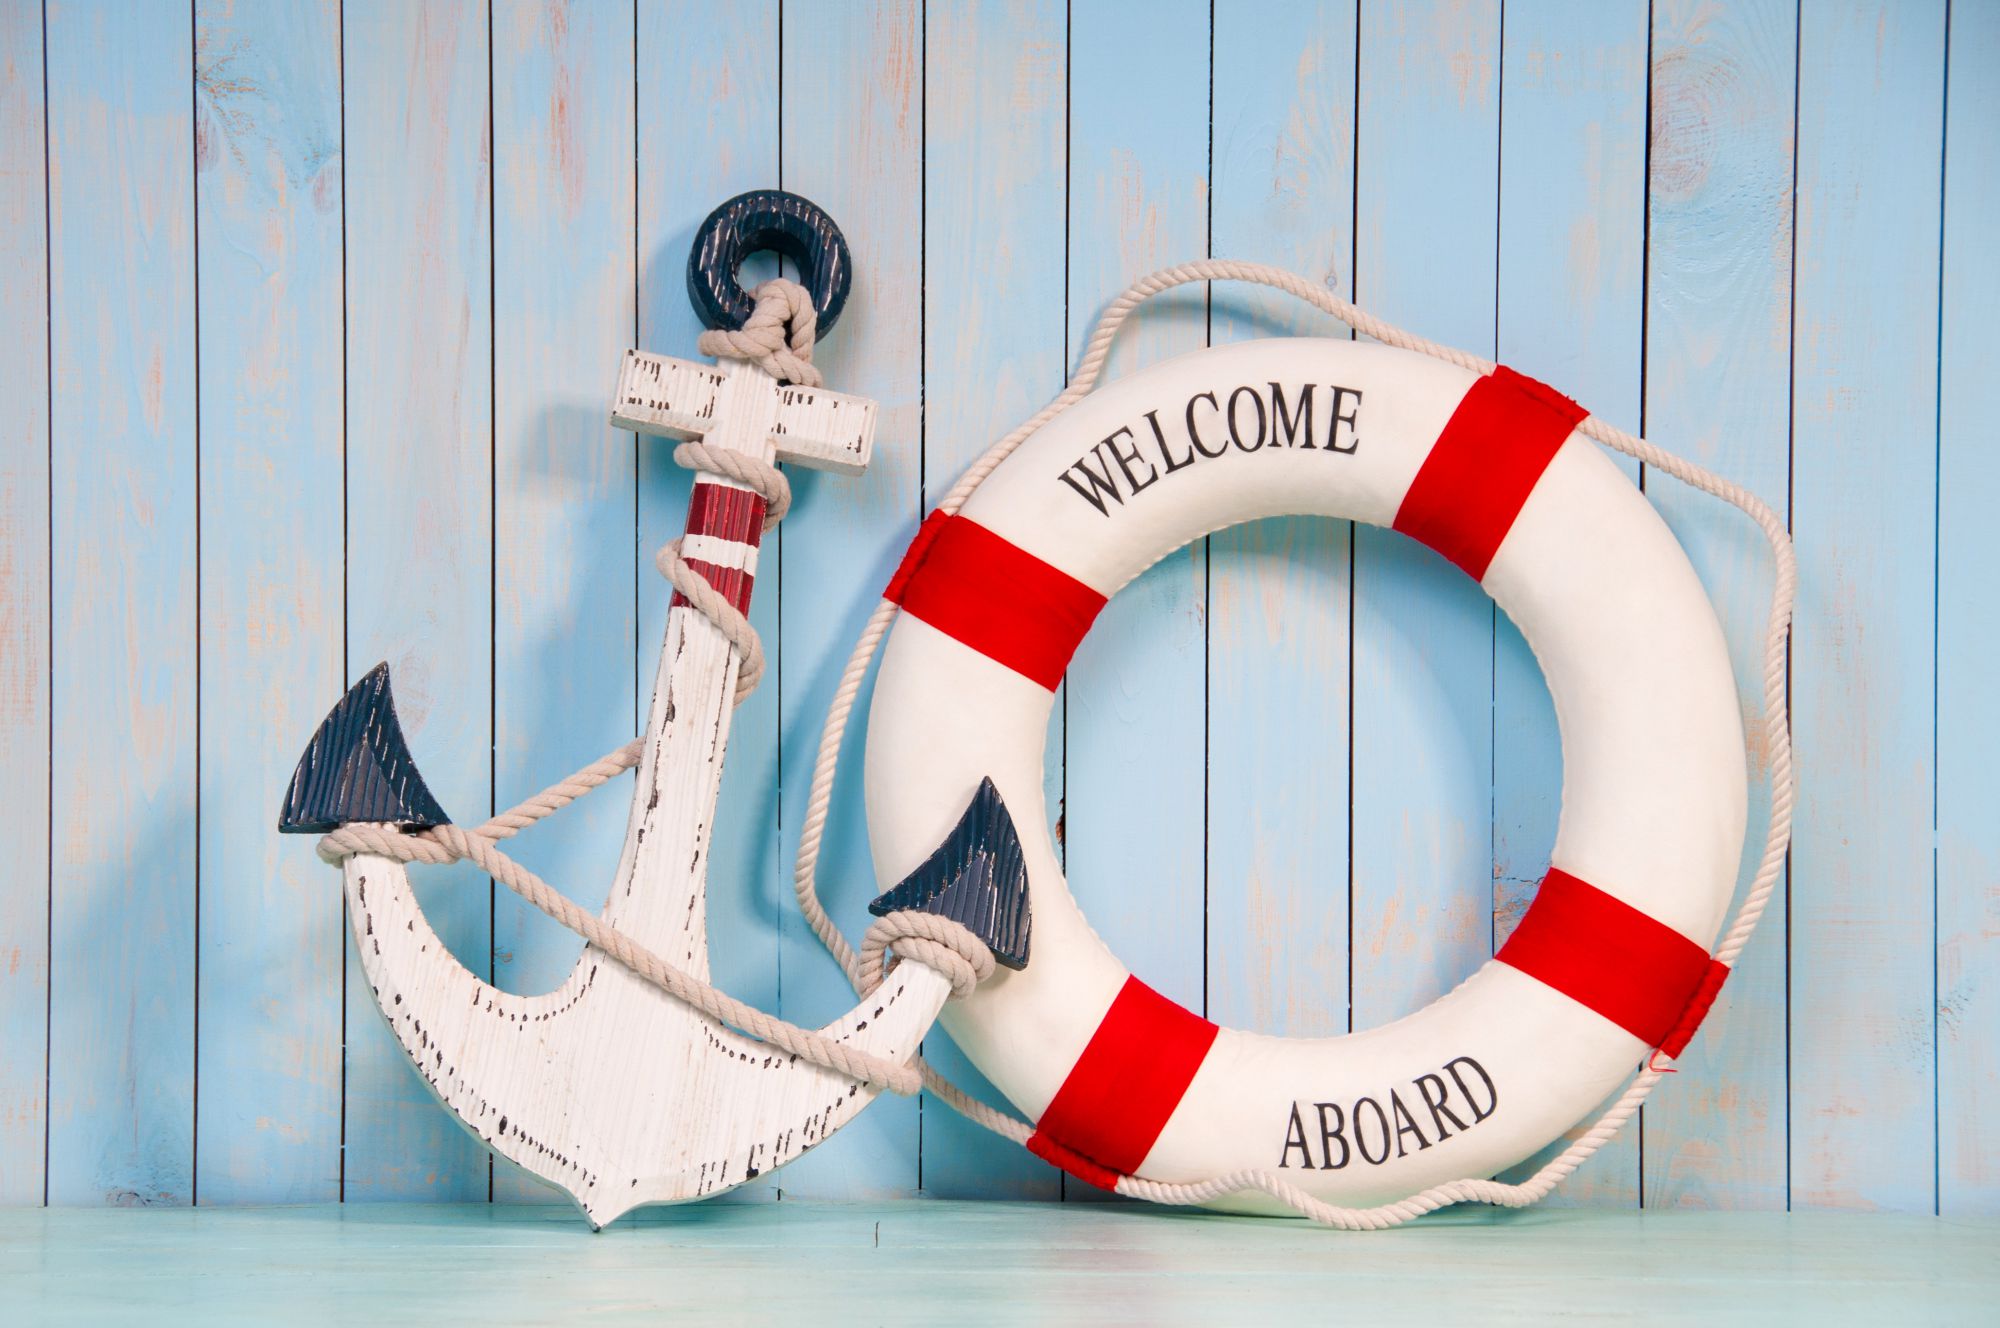 Welcome Aboard life preserver and anchor.